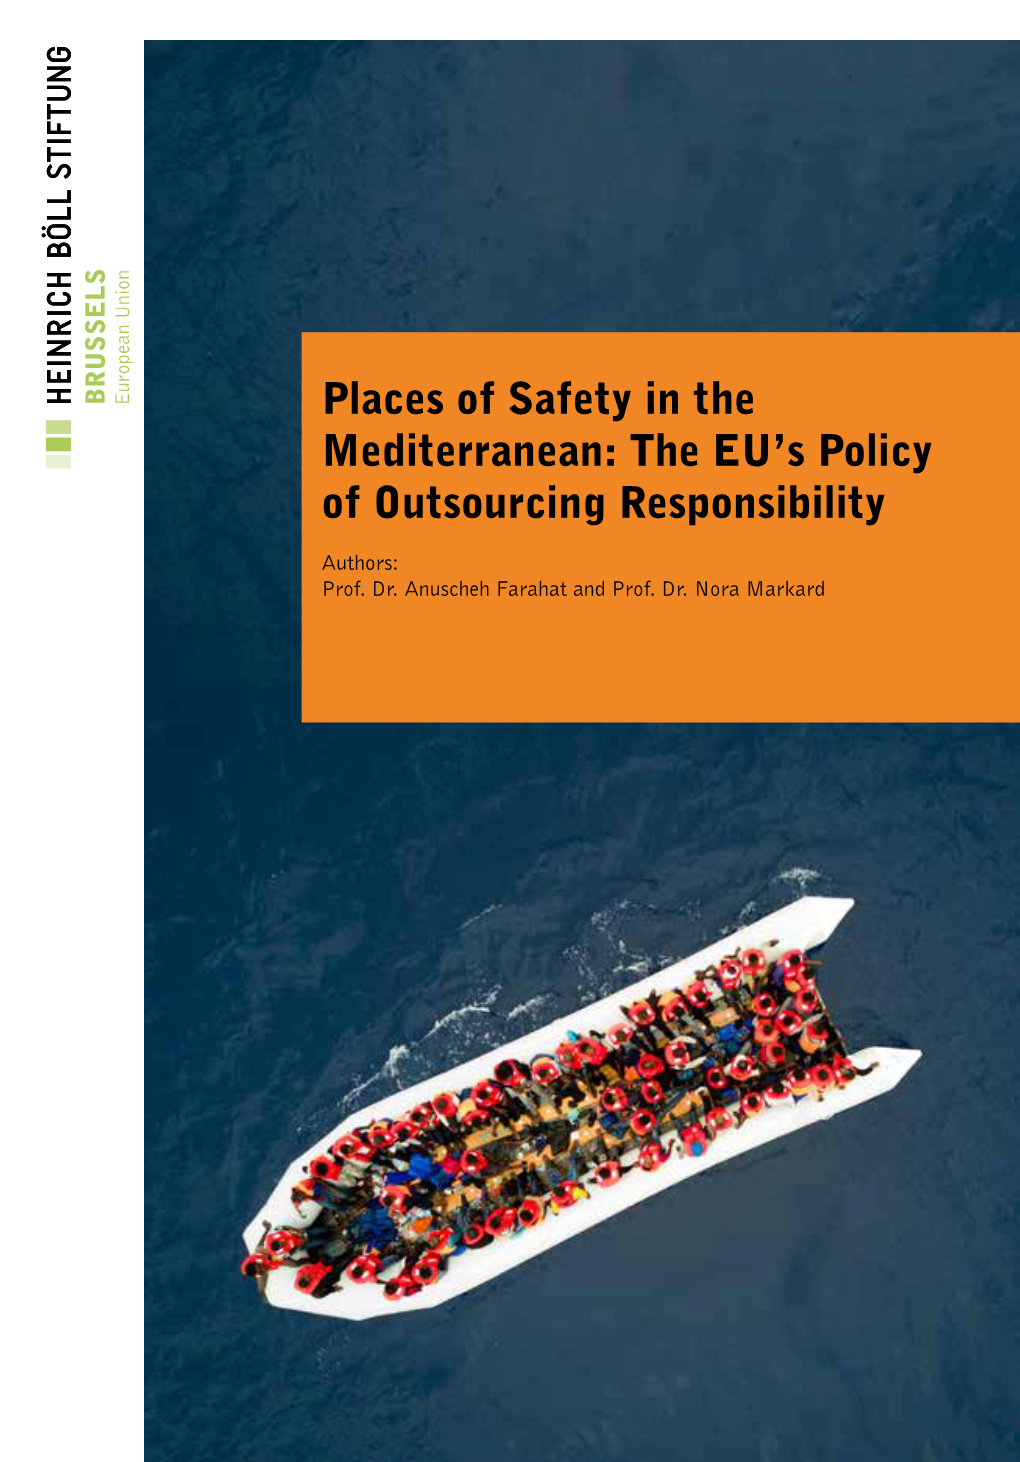 Places of Safety in the Mediterranean: the EU's Policy of Outsourcing Responsibility